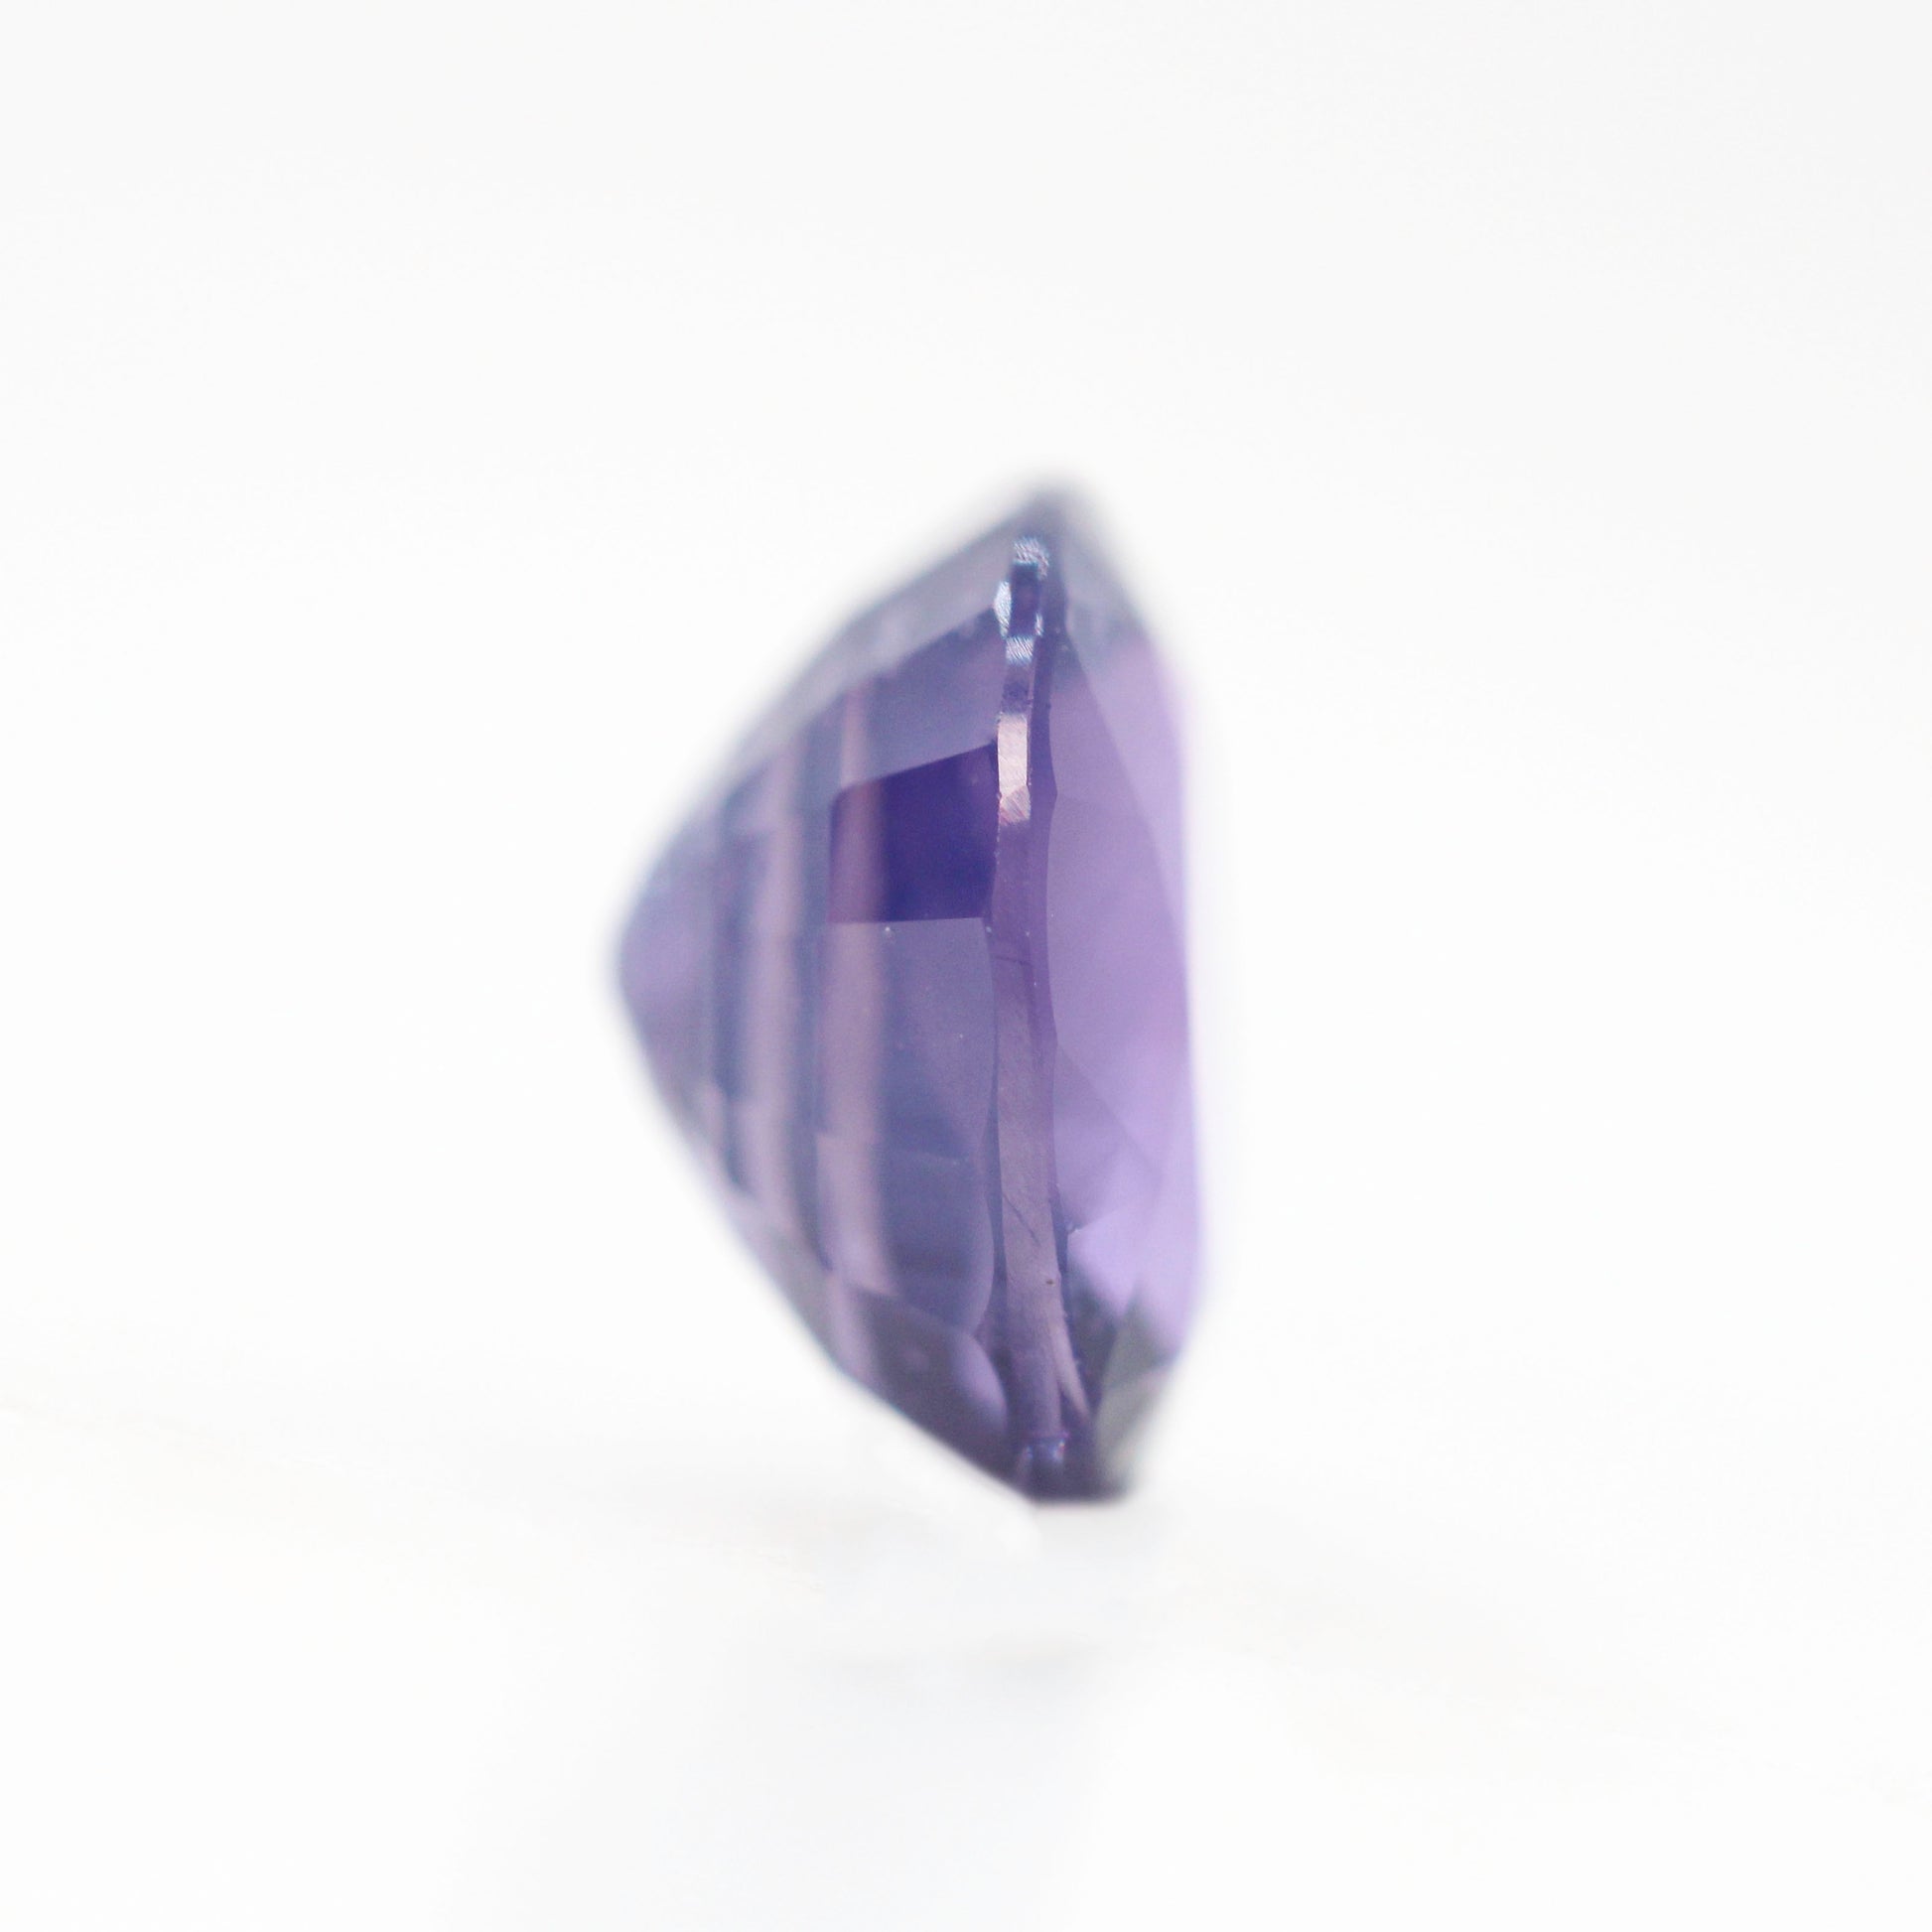 2.21 Carat Purple Oval Sapphire for Custom Work - Inventory Code POS221 - Midwinter Co. Alternative Bridal Rings and Modern Fine Jewelry